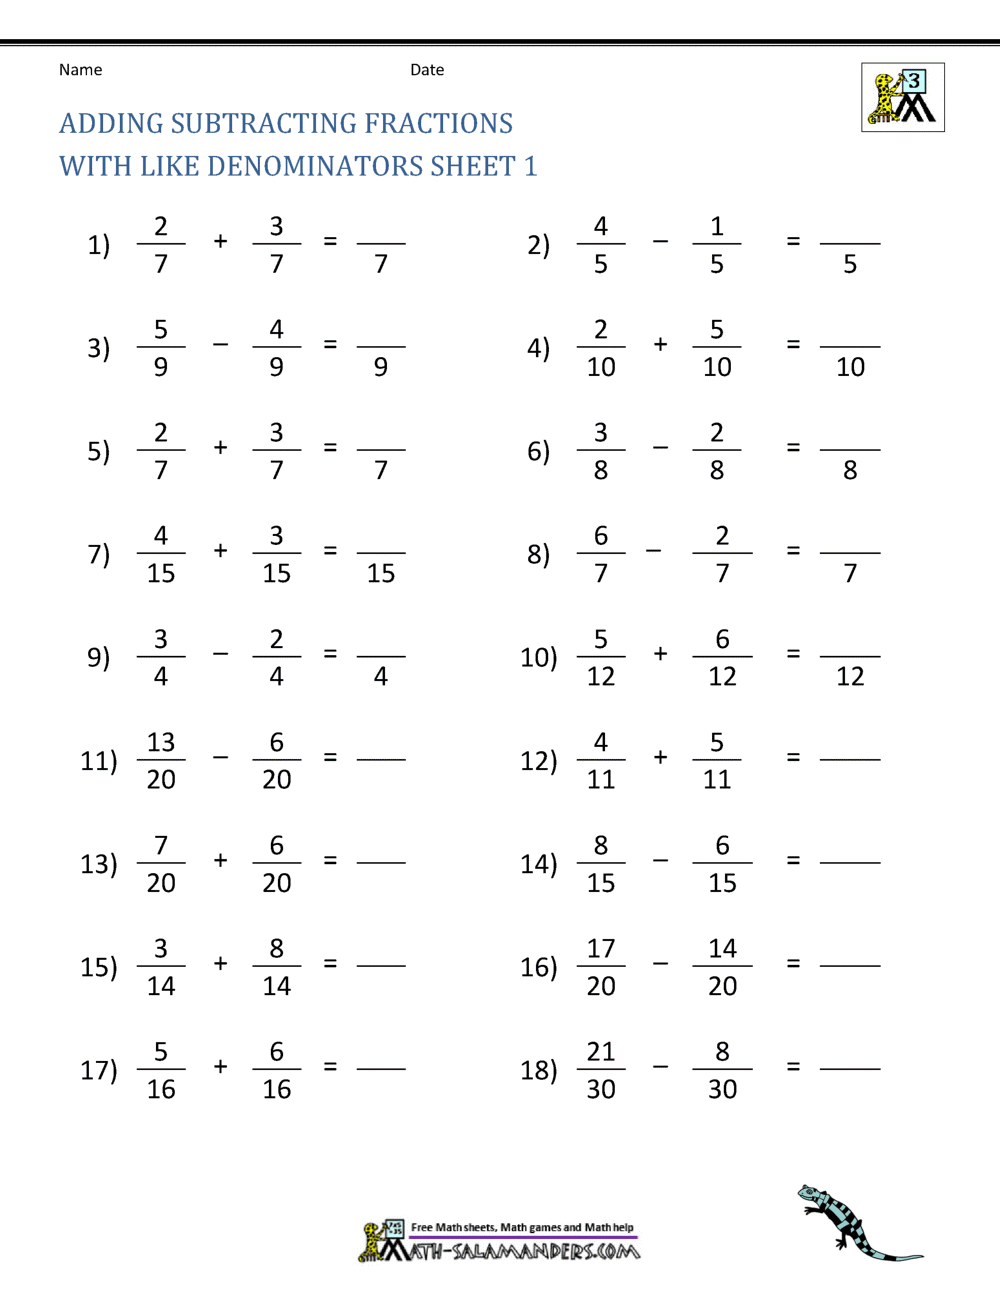 Adding Fractions With Like Denominators Worksheets